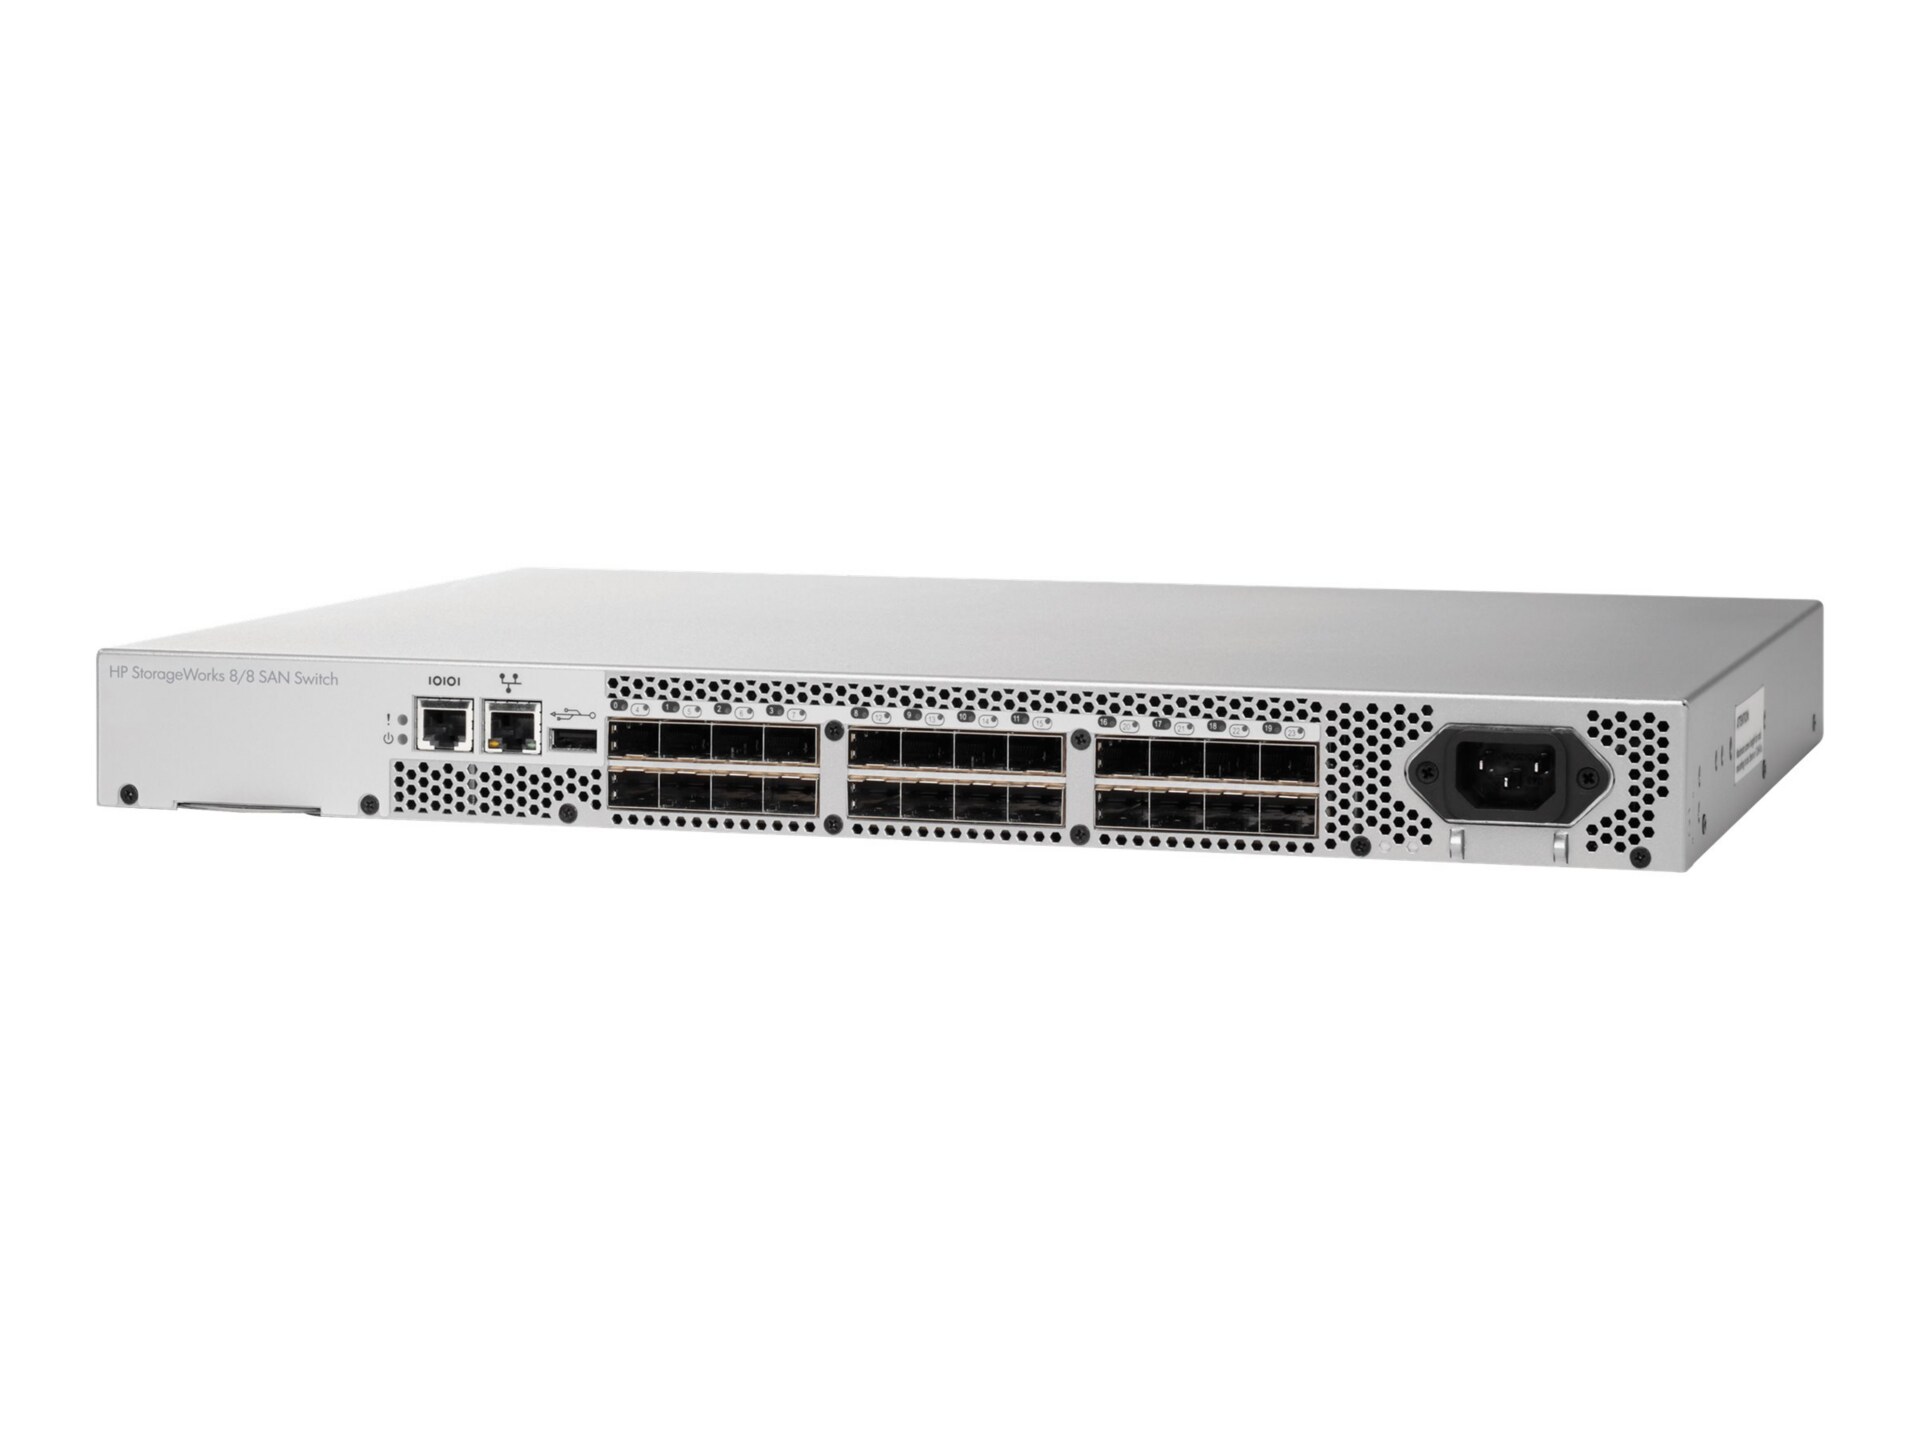 HPE 8/8 (8) Full Fabric Ports Enabled SAN Switch - switch - 8 ports - manag